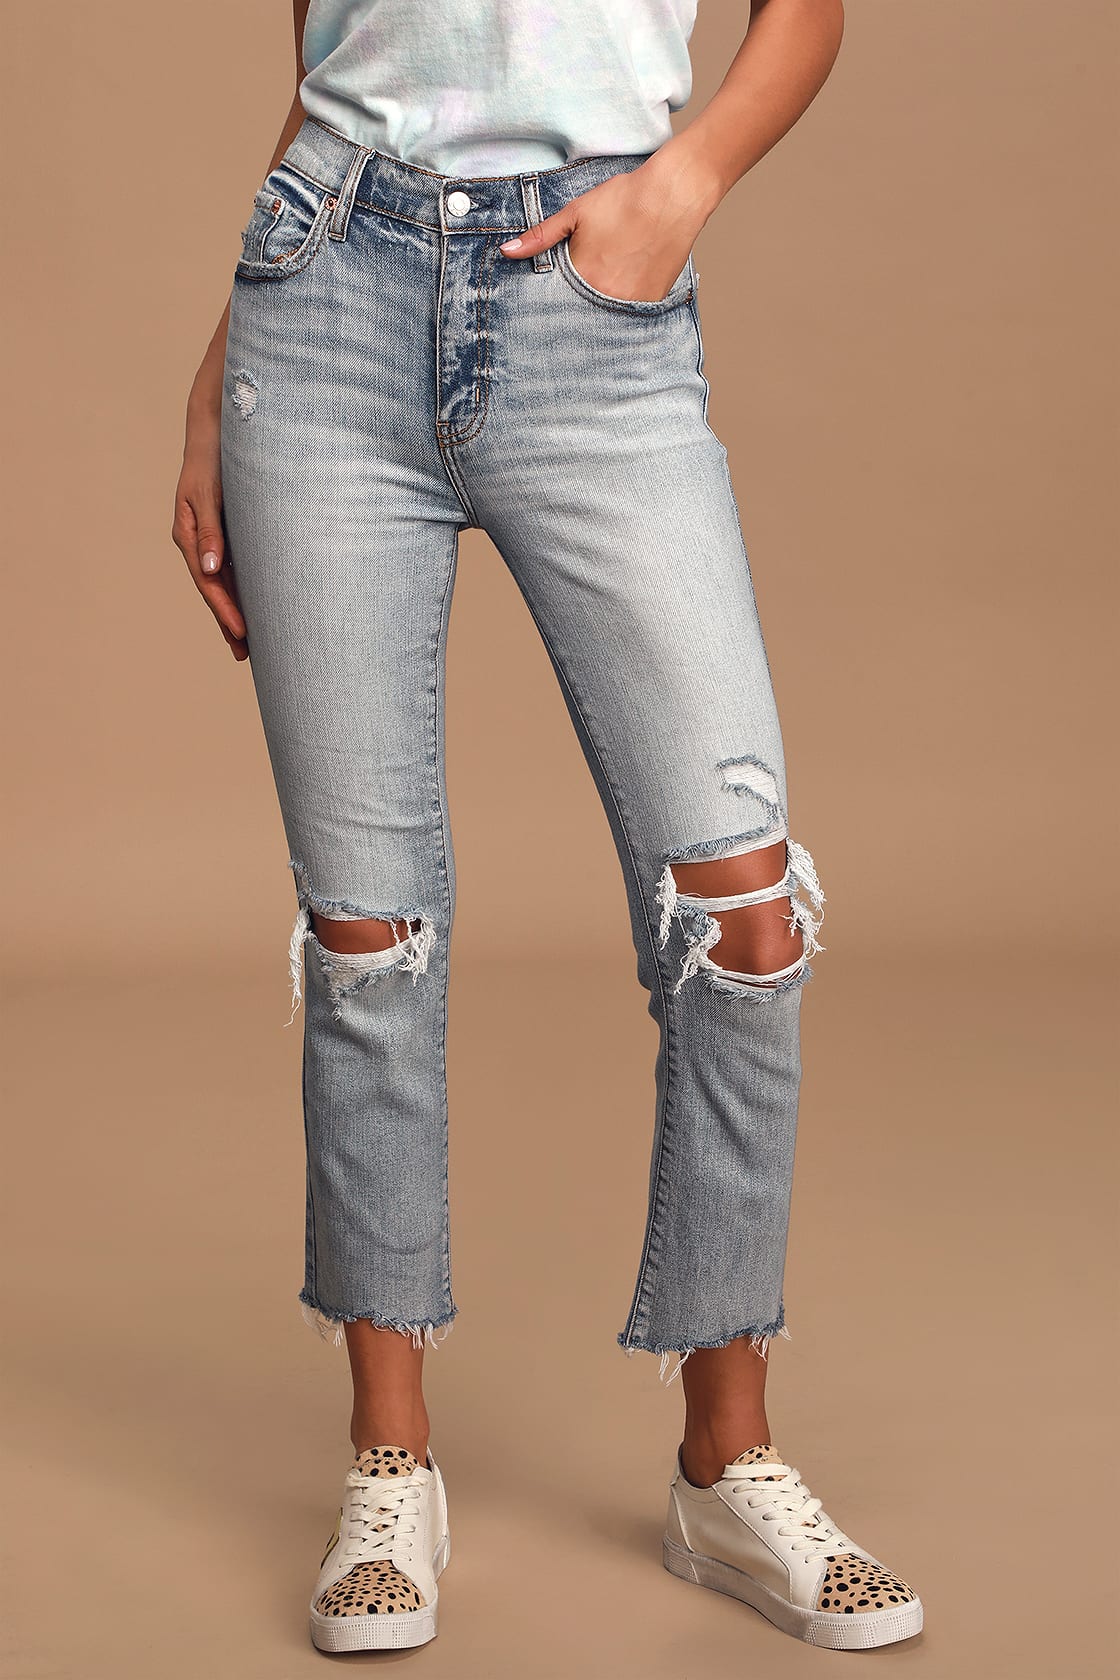 Shy Girl White High-Waisted Cropped Distressed Flare Jeans